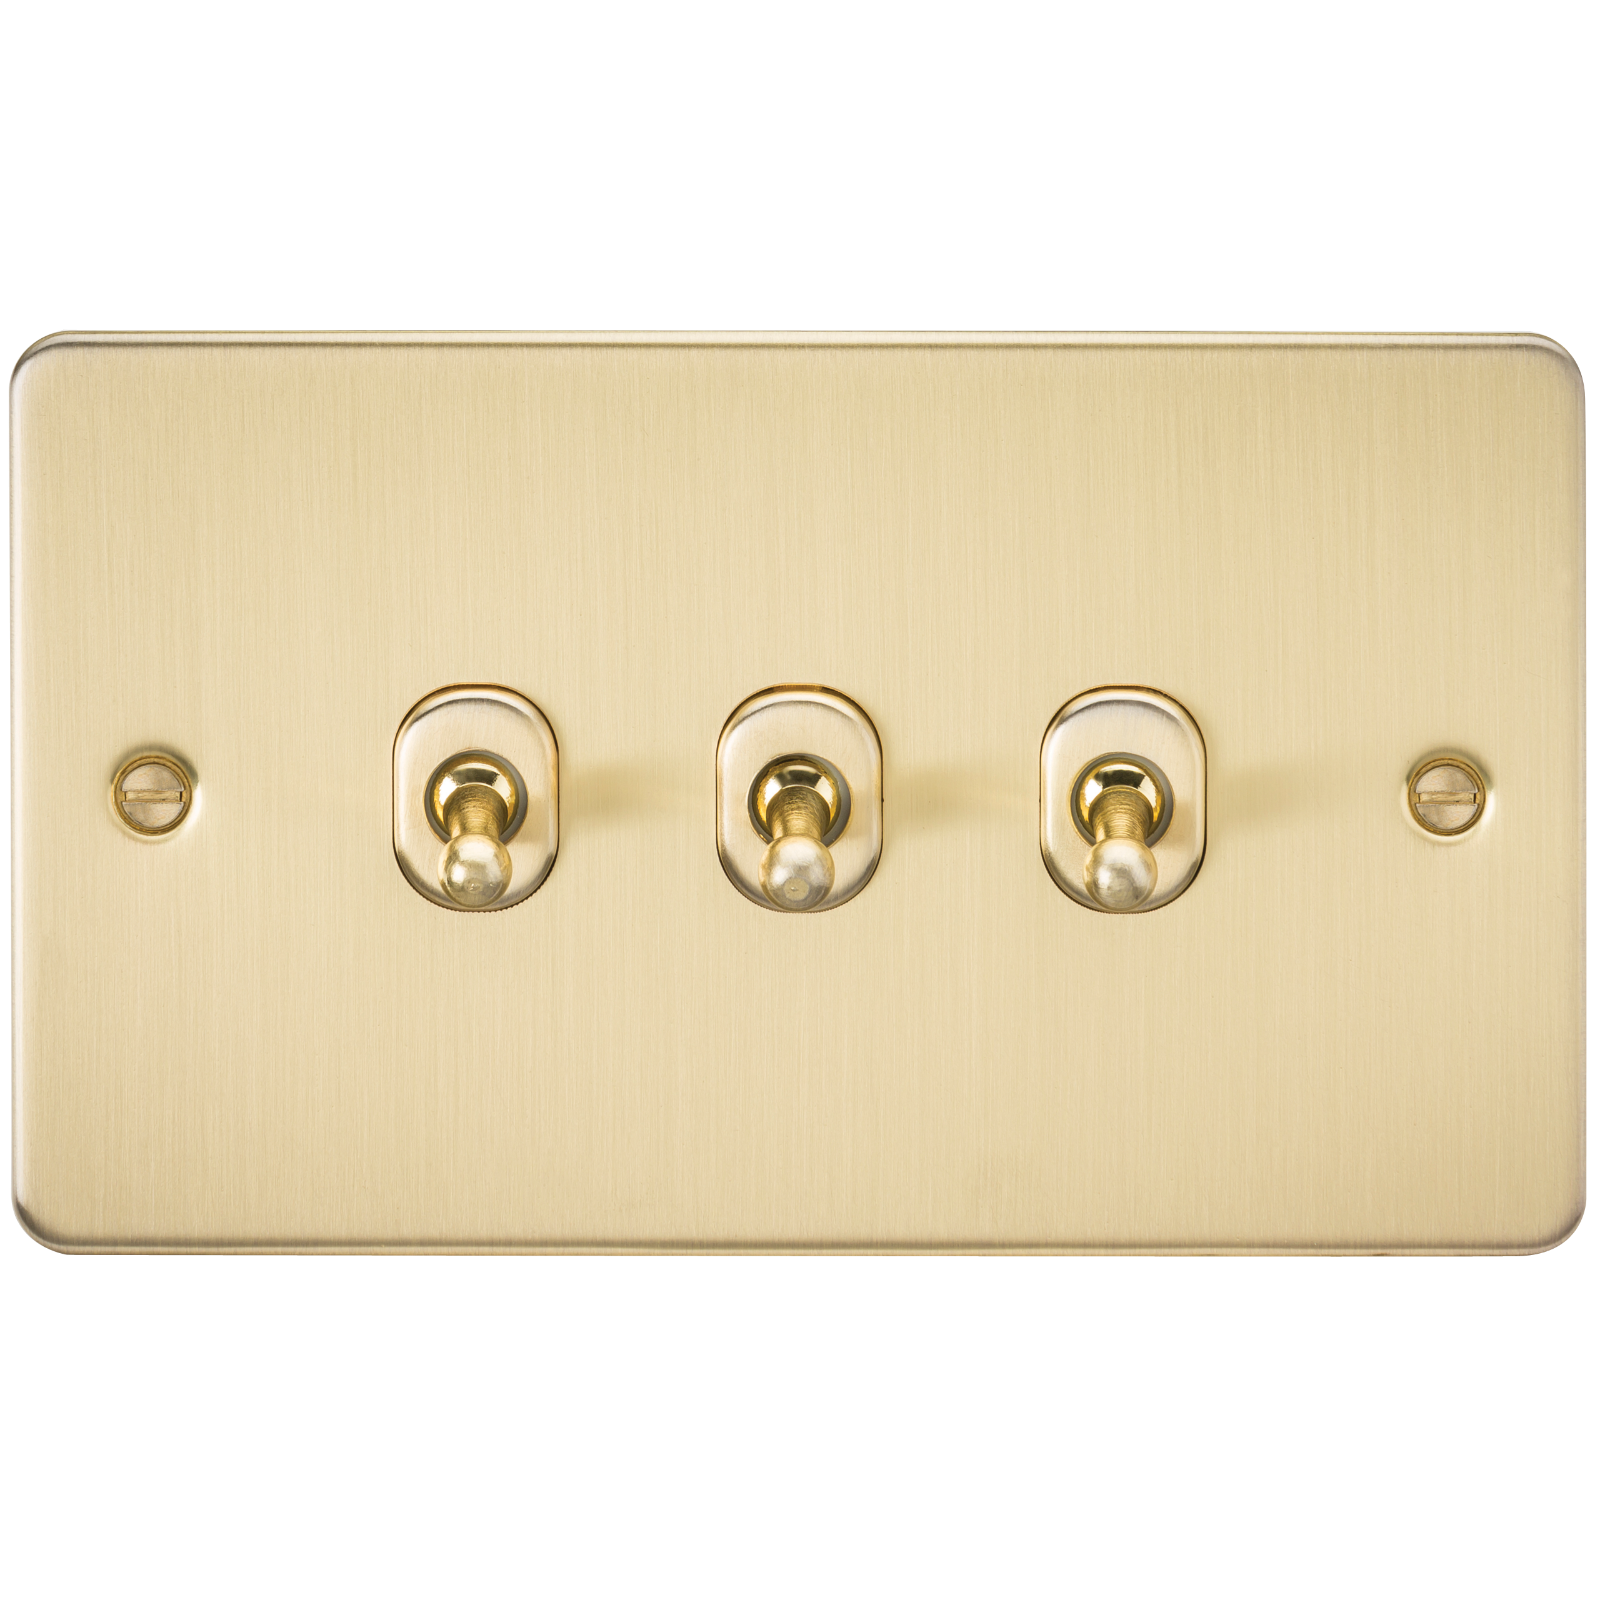 Flat Plate 10A 3G 2-way Toggle Switch - Brushed Brass - FP3TOGBB 